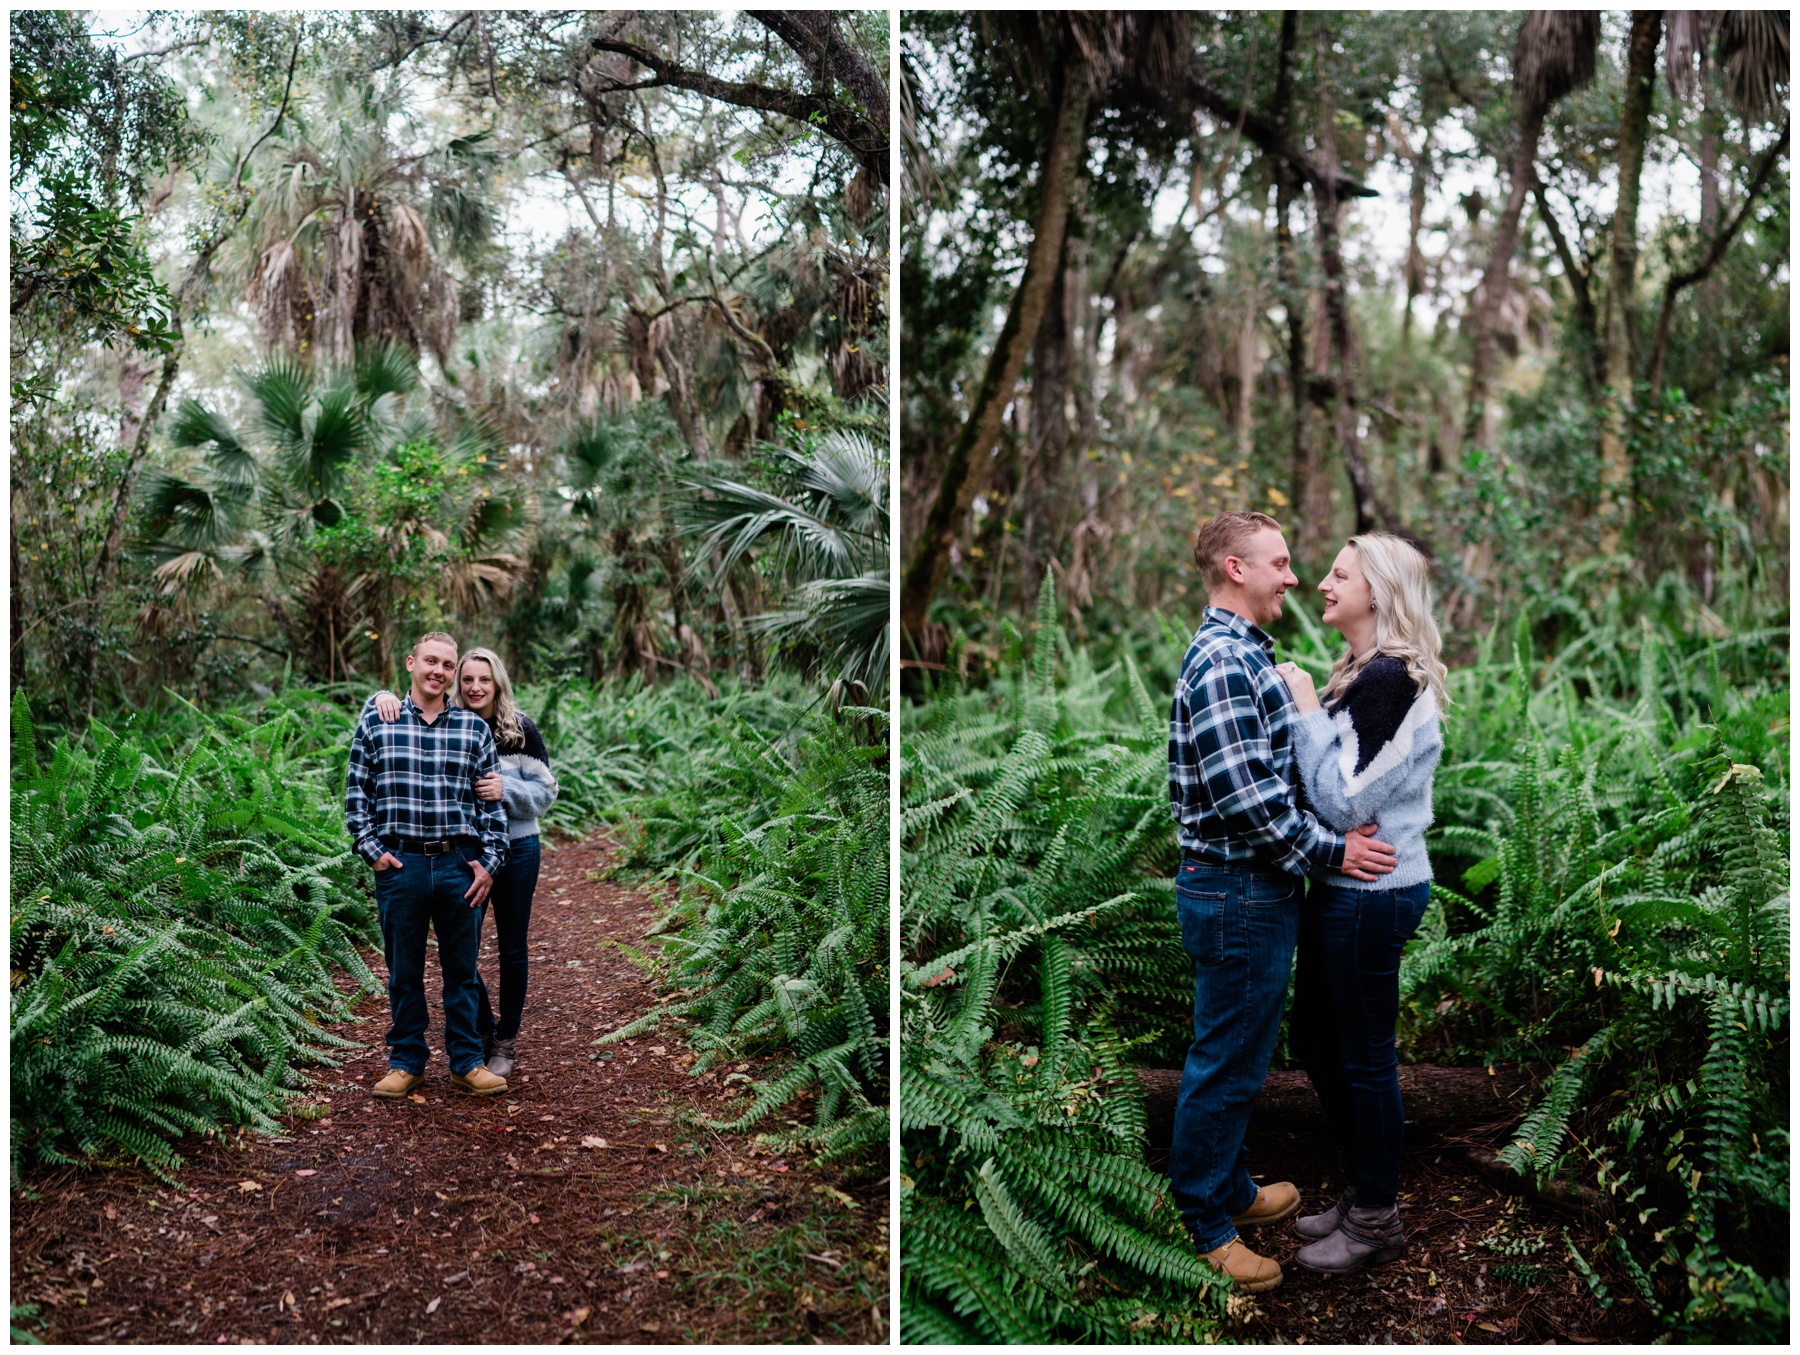 Couple embraces in swamp setting during a Caloosahatchee River photo shoot.